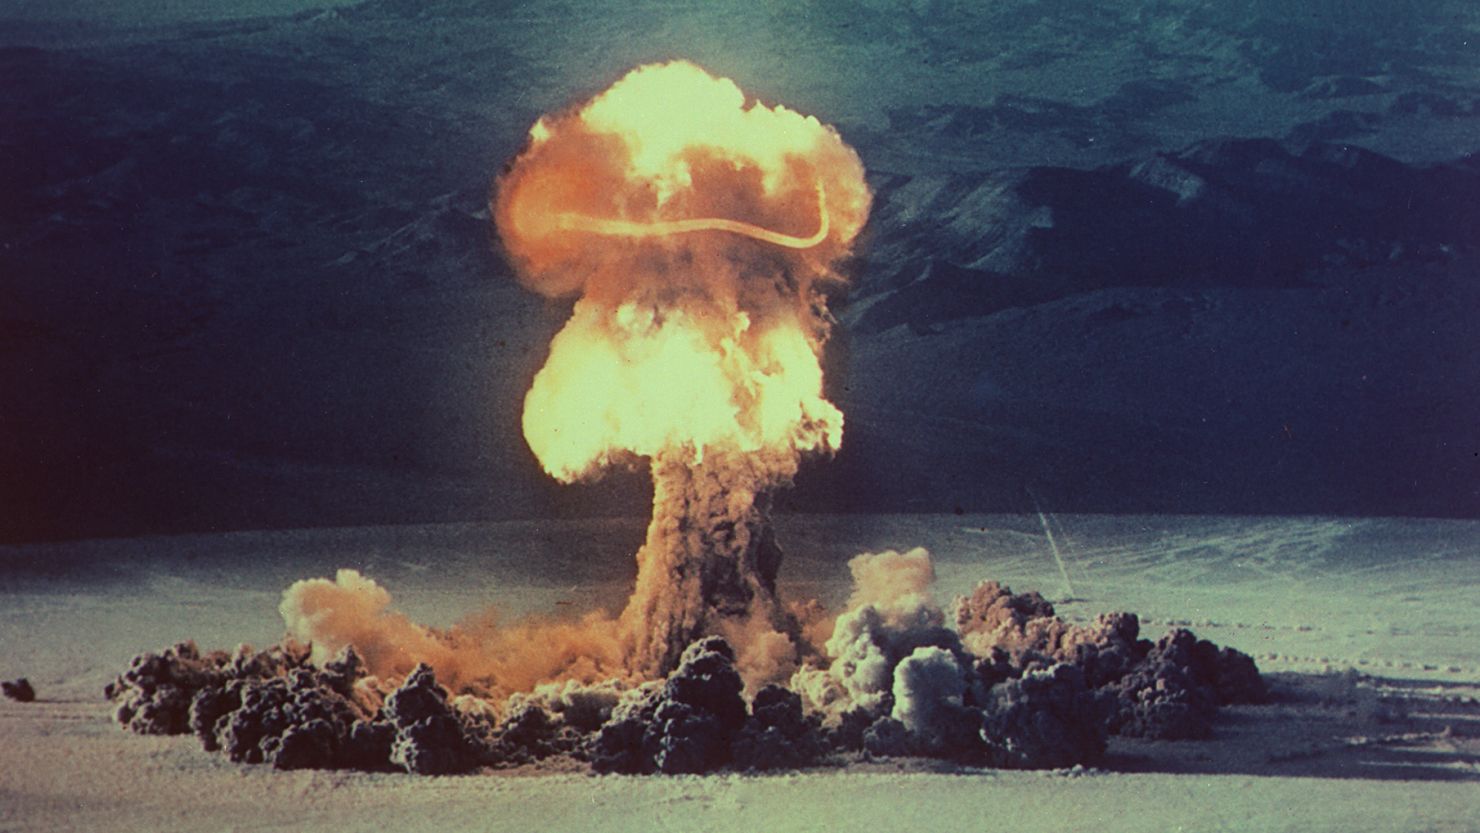 Radioactive carbon from nuclear tests has been found in the ocean. The 37 kiloton "Priscilla" nuclear test was detonated at the Nevada Test Site in 1957.